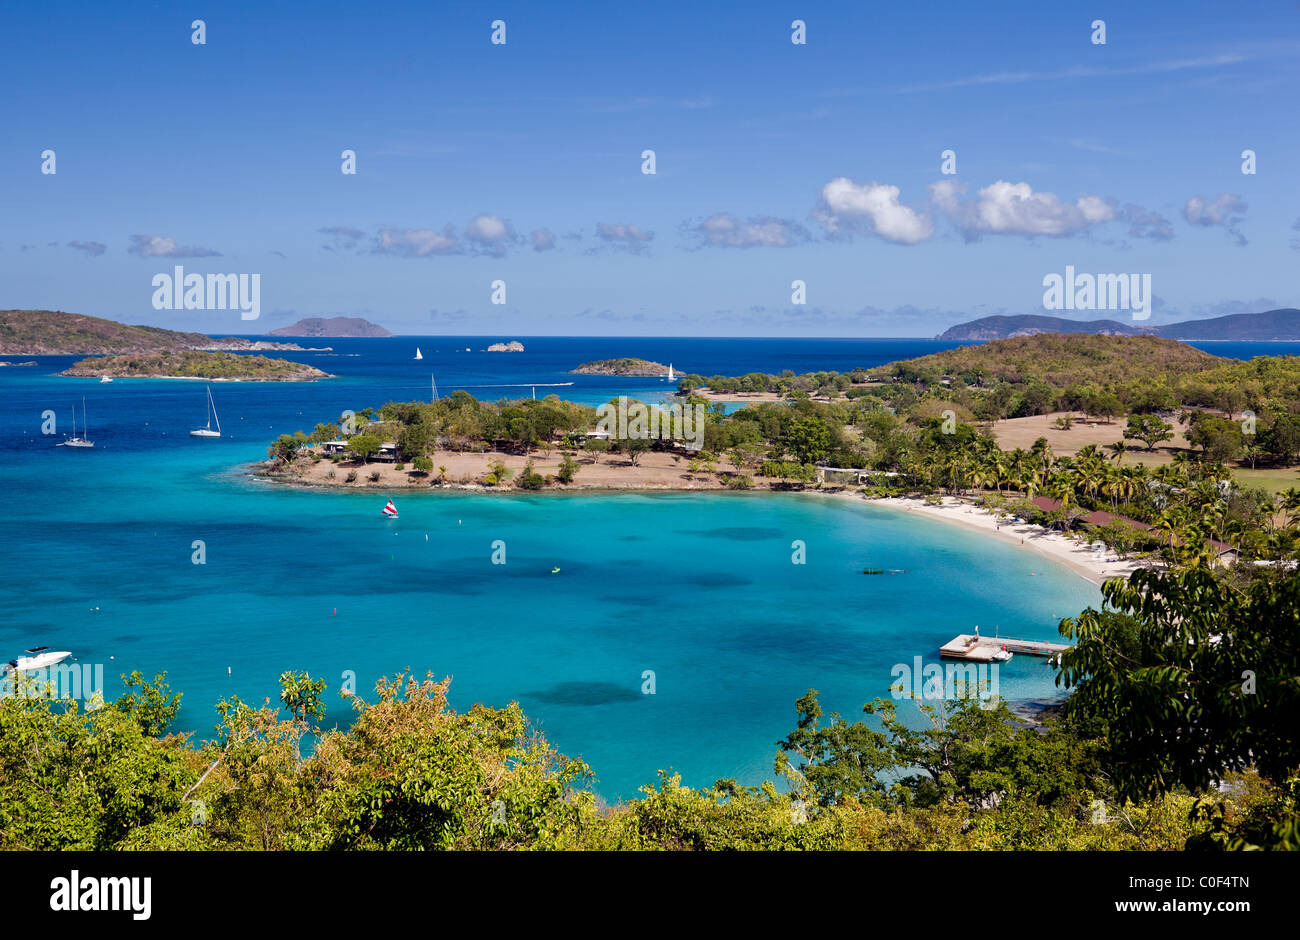 Caneel Bay, a luxury resort on the Caribbean island of St John in the US Virgin Islands Stock Photo